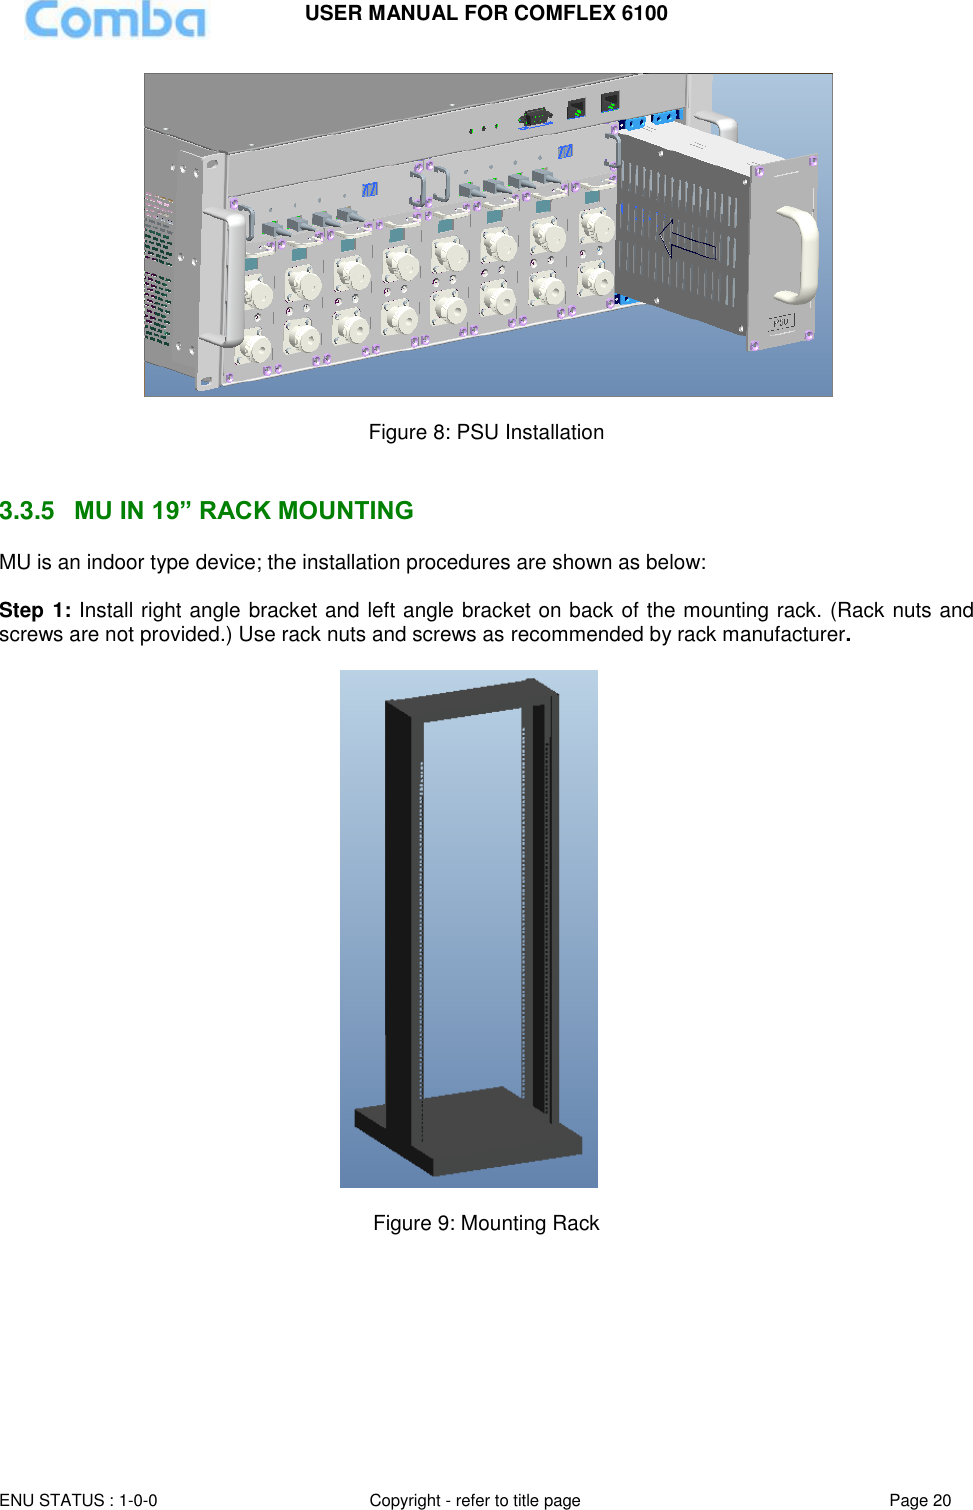 USER MANUAL FOR COMFLEX 6100 ENU STATUS : 1-0-0 Copyright - refer to title page Page 20    Figure 8: PSU Installation   3.3.5  MU IN 19” RACK MOUNTING MU is an indoor type device; the installation procedures are shown as below:  Step 1: Install right angle bracket and left angle bracket on back of the mounting rack. (Rack nuts and screws are not provided.) Use rack nuts and screws as recommended by rack manufacturer.    Figure 9: Mounting Rack    